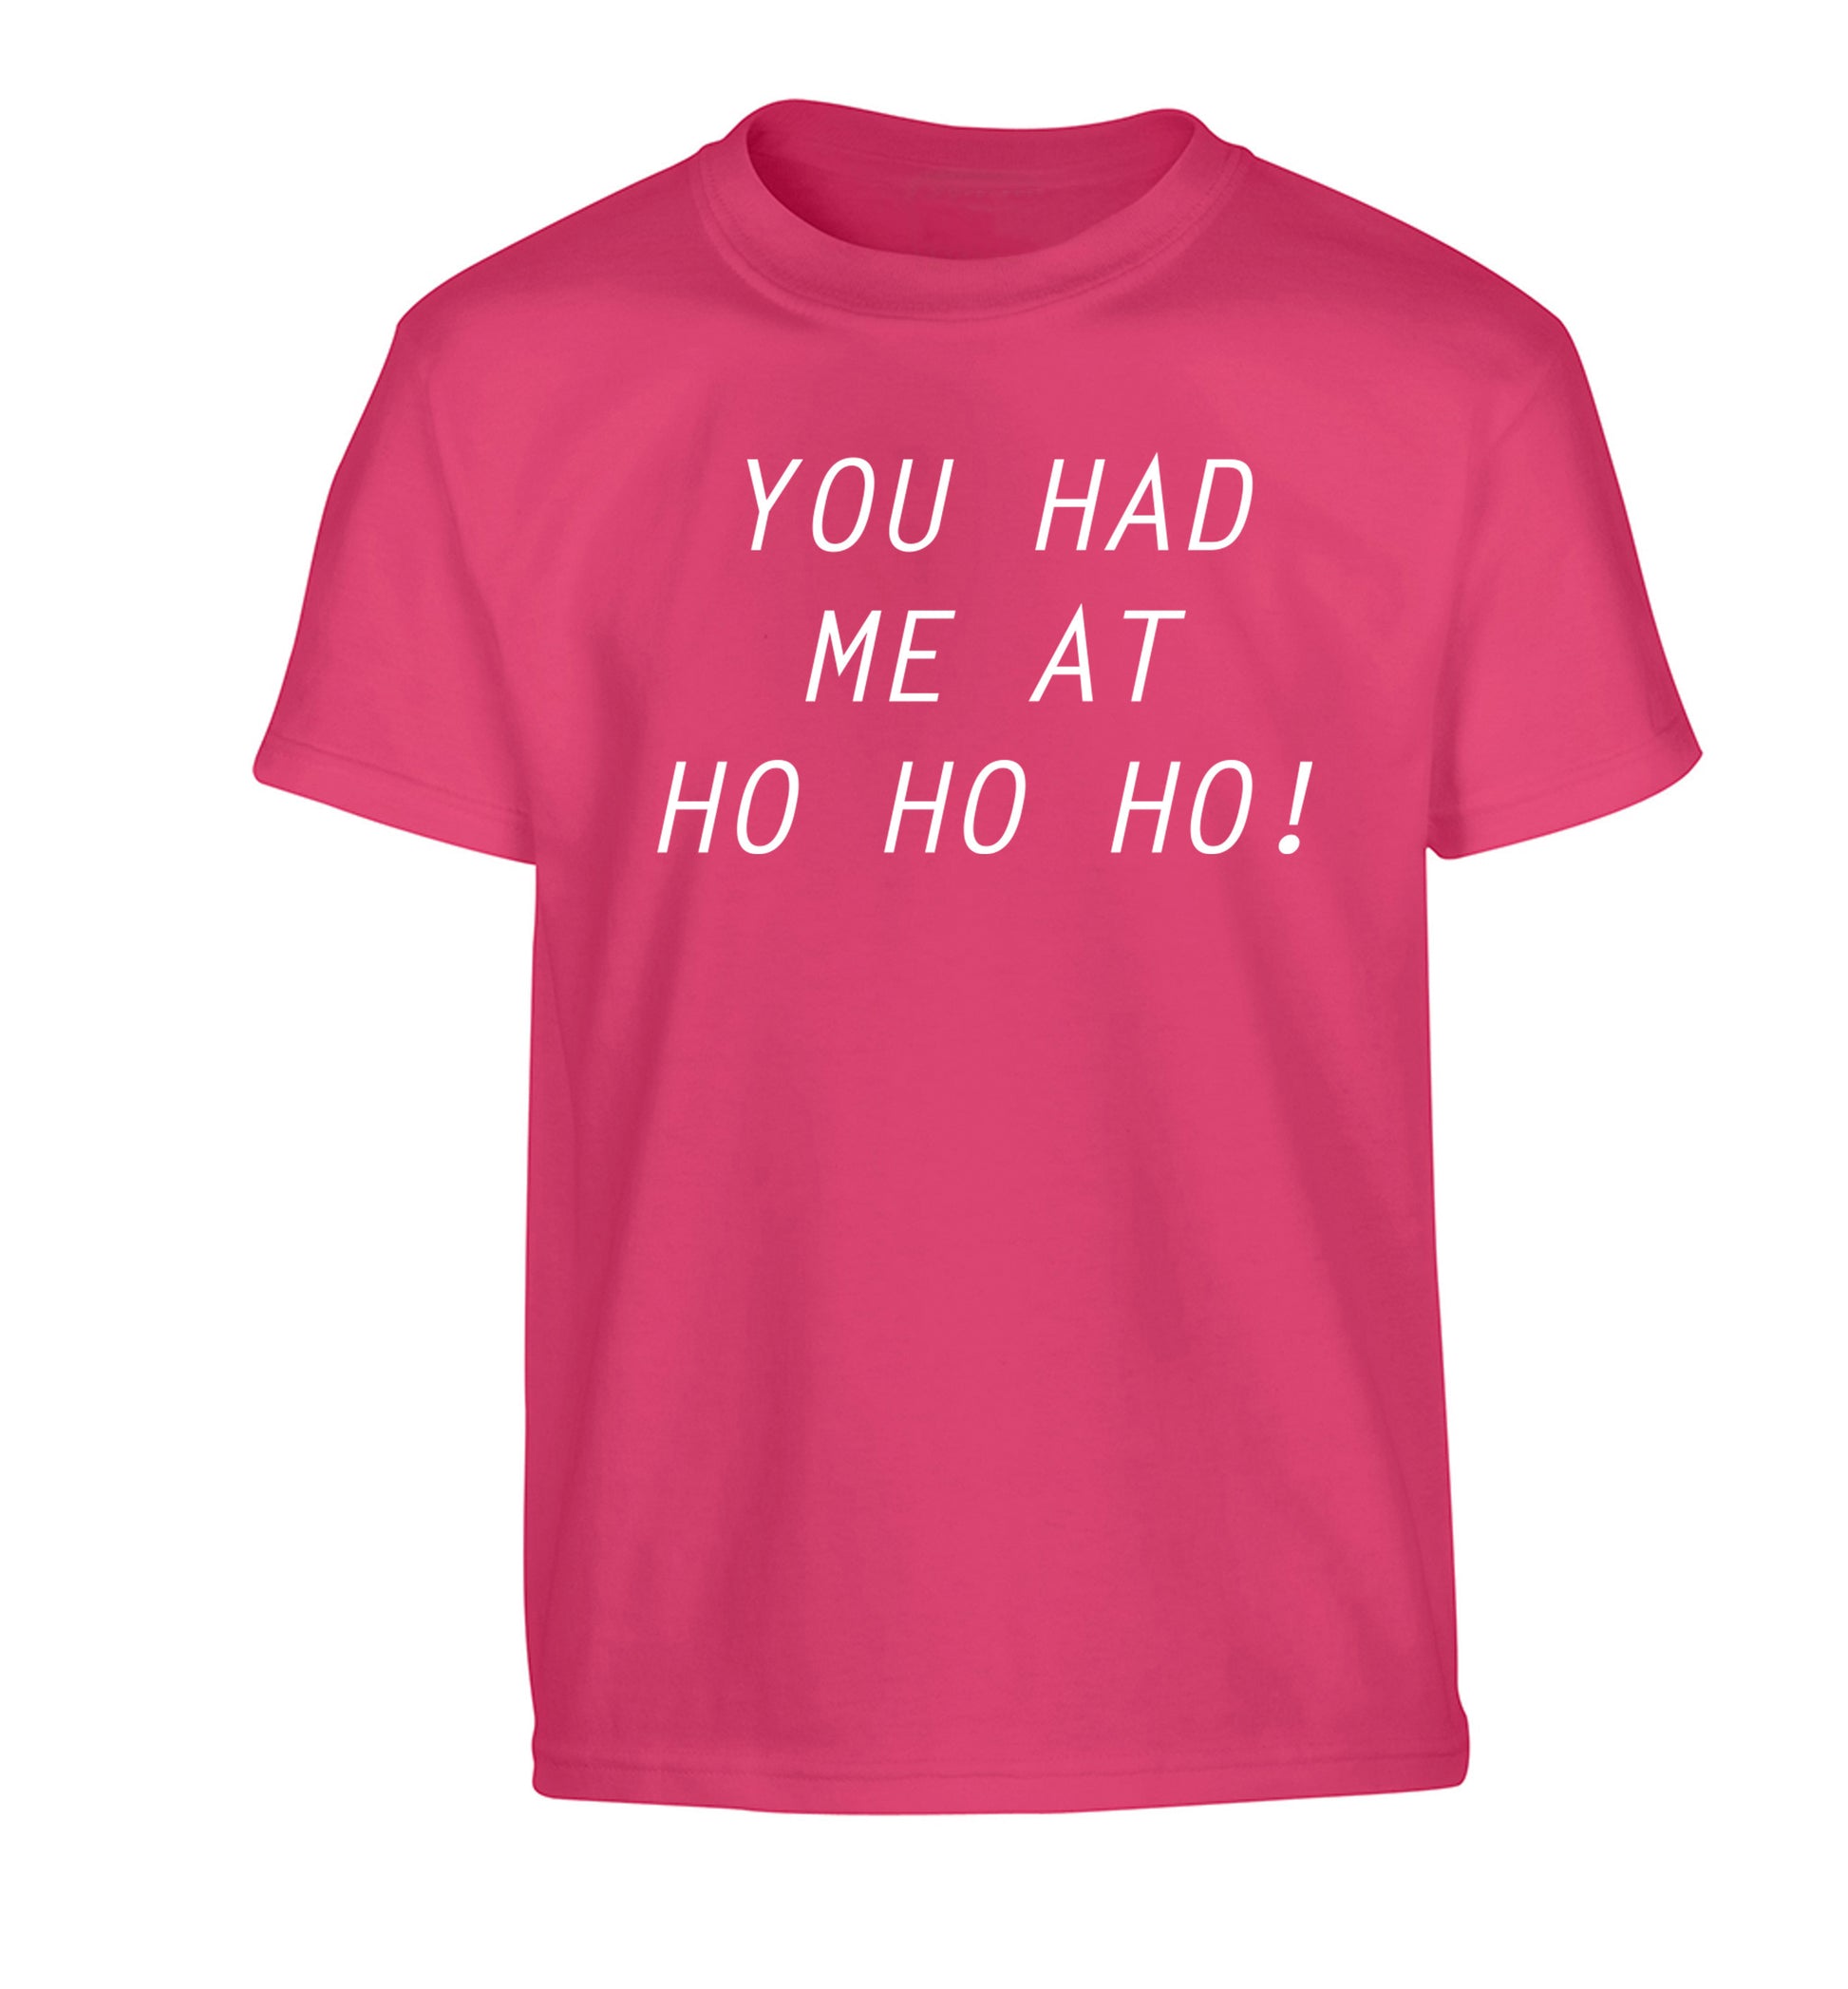 You had me at ho ho ho Children's pink Tshirt 12-14 Years